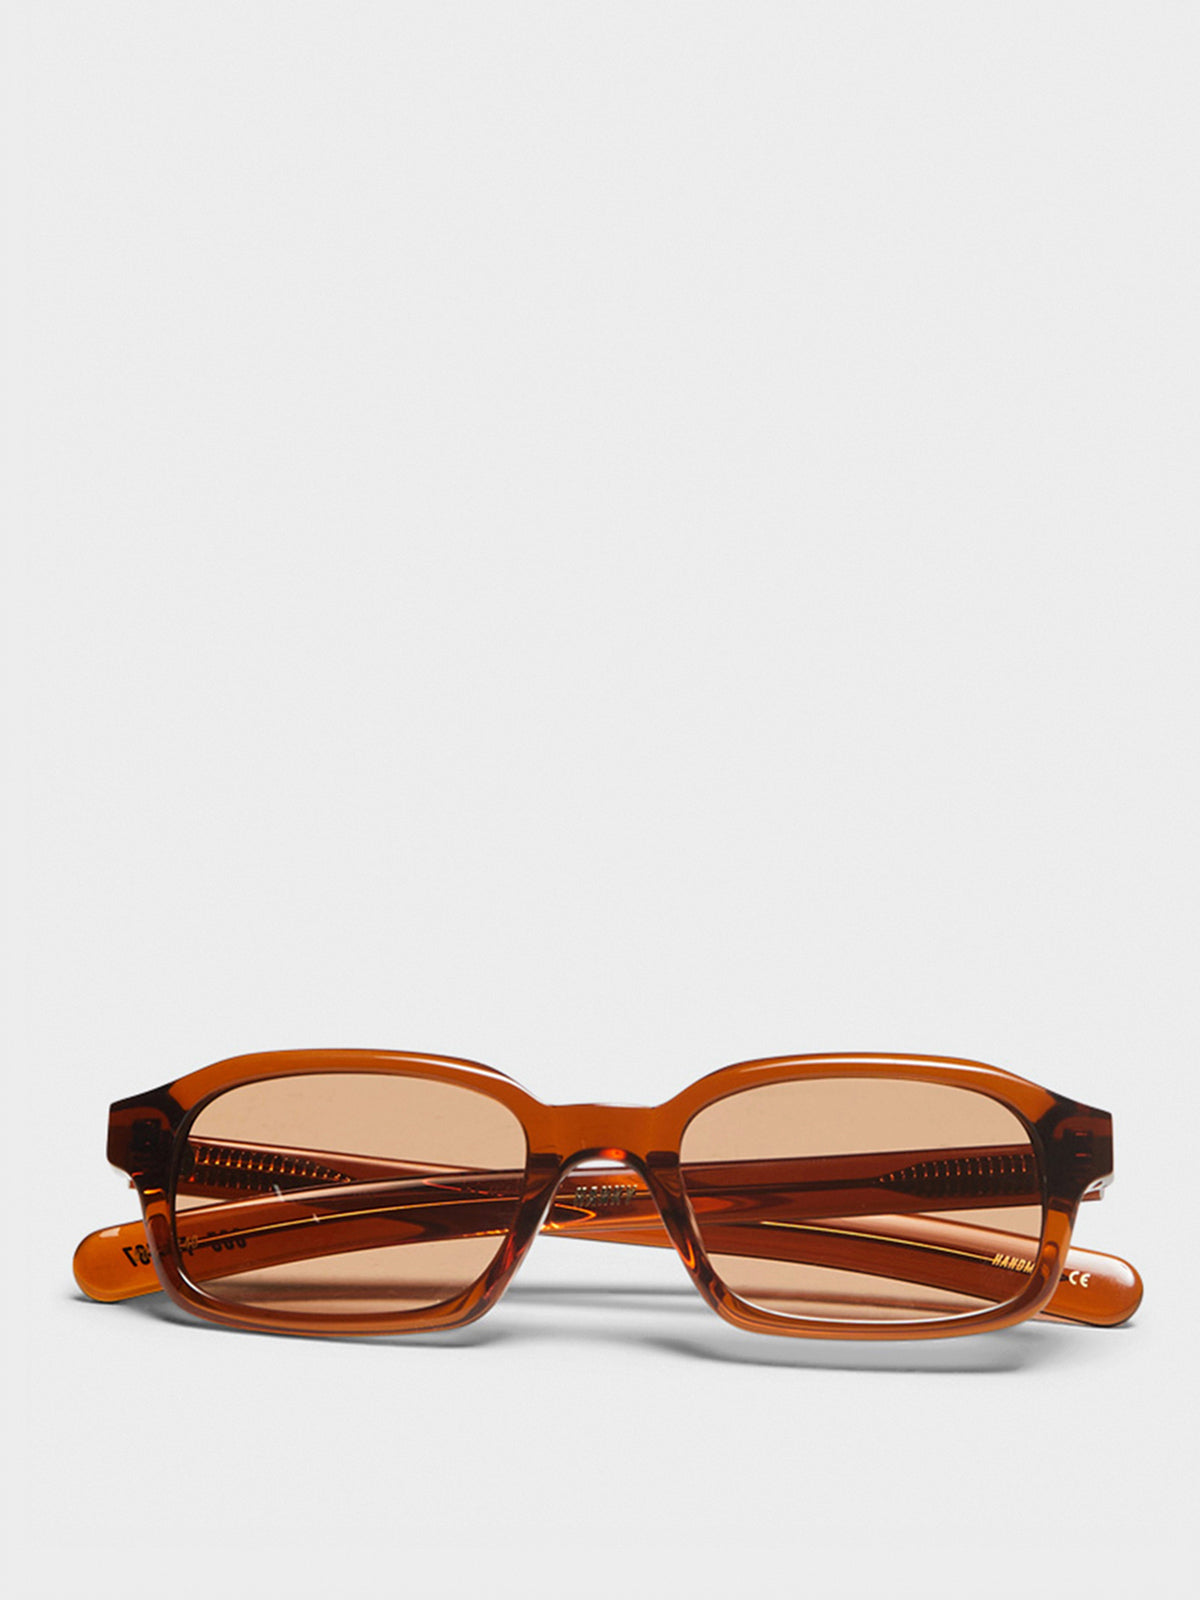 Hanky Sunglasses in Crystal Brown and Brown Lens